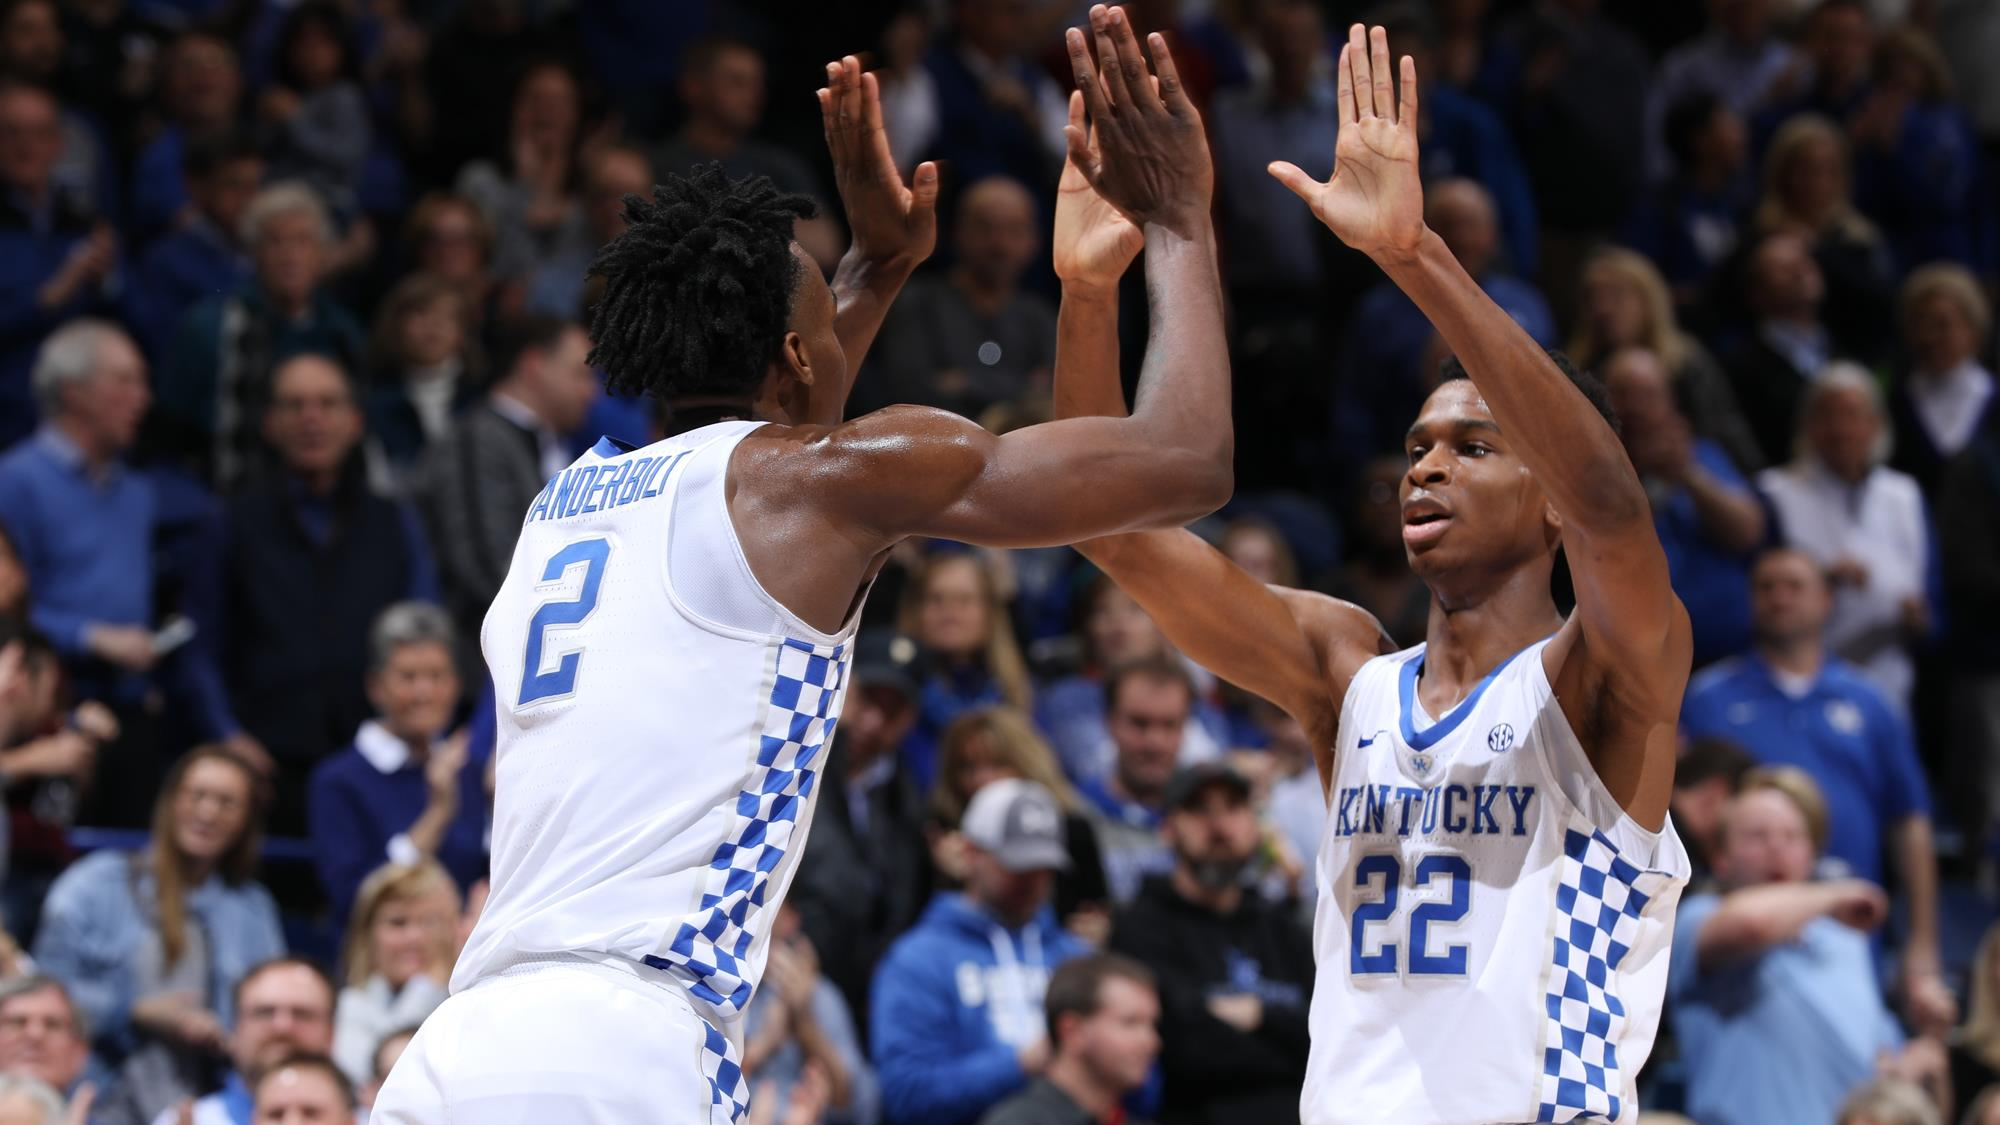 UK Takes One Away from ‘Bama, Ends Skid